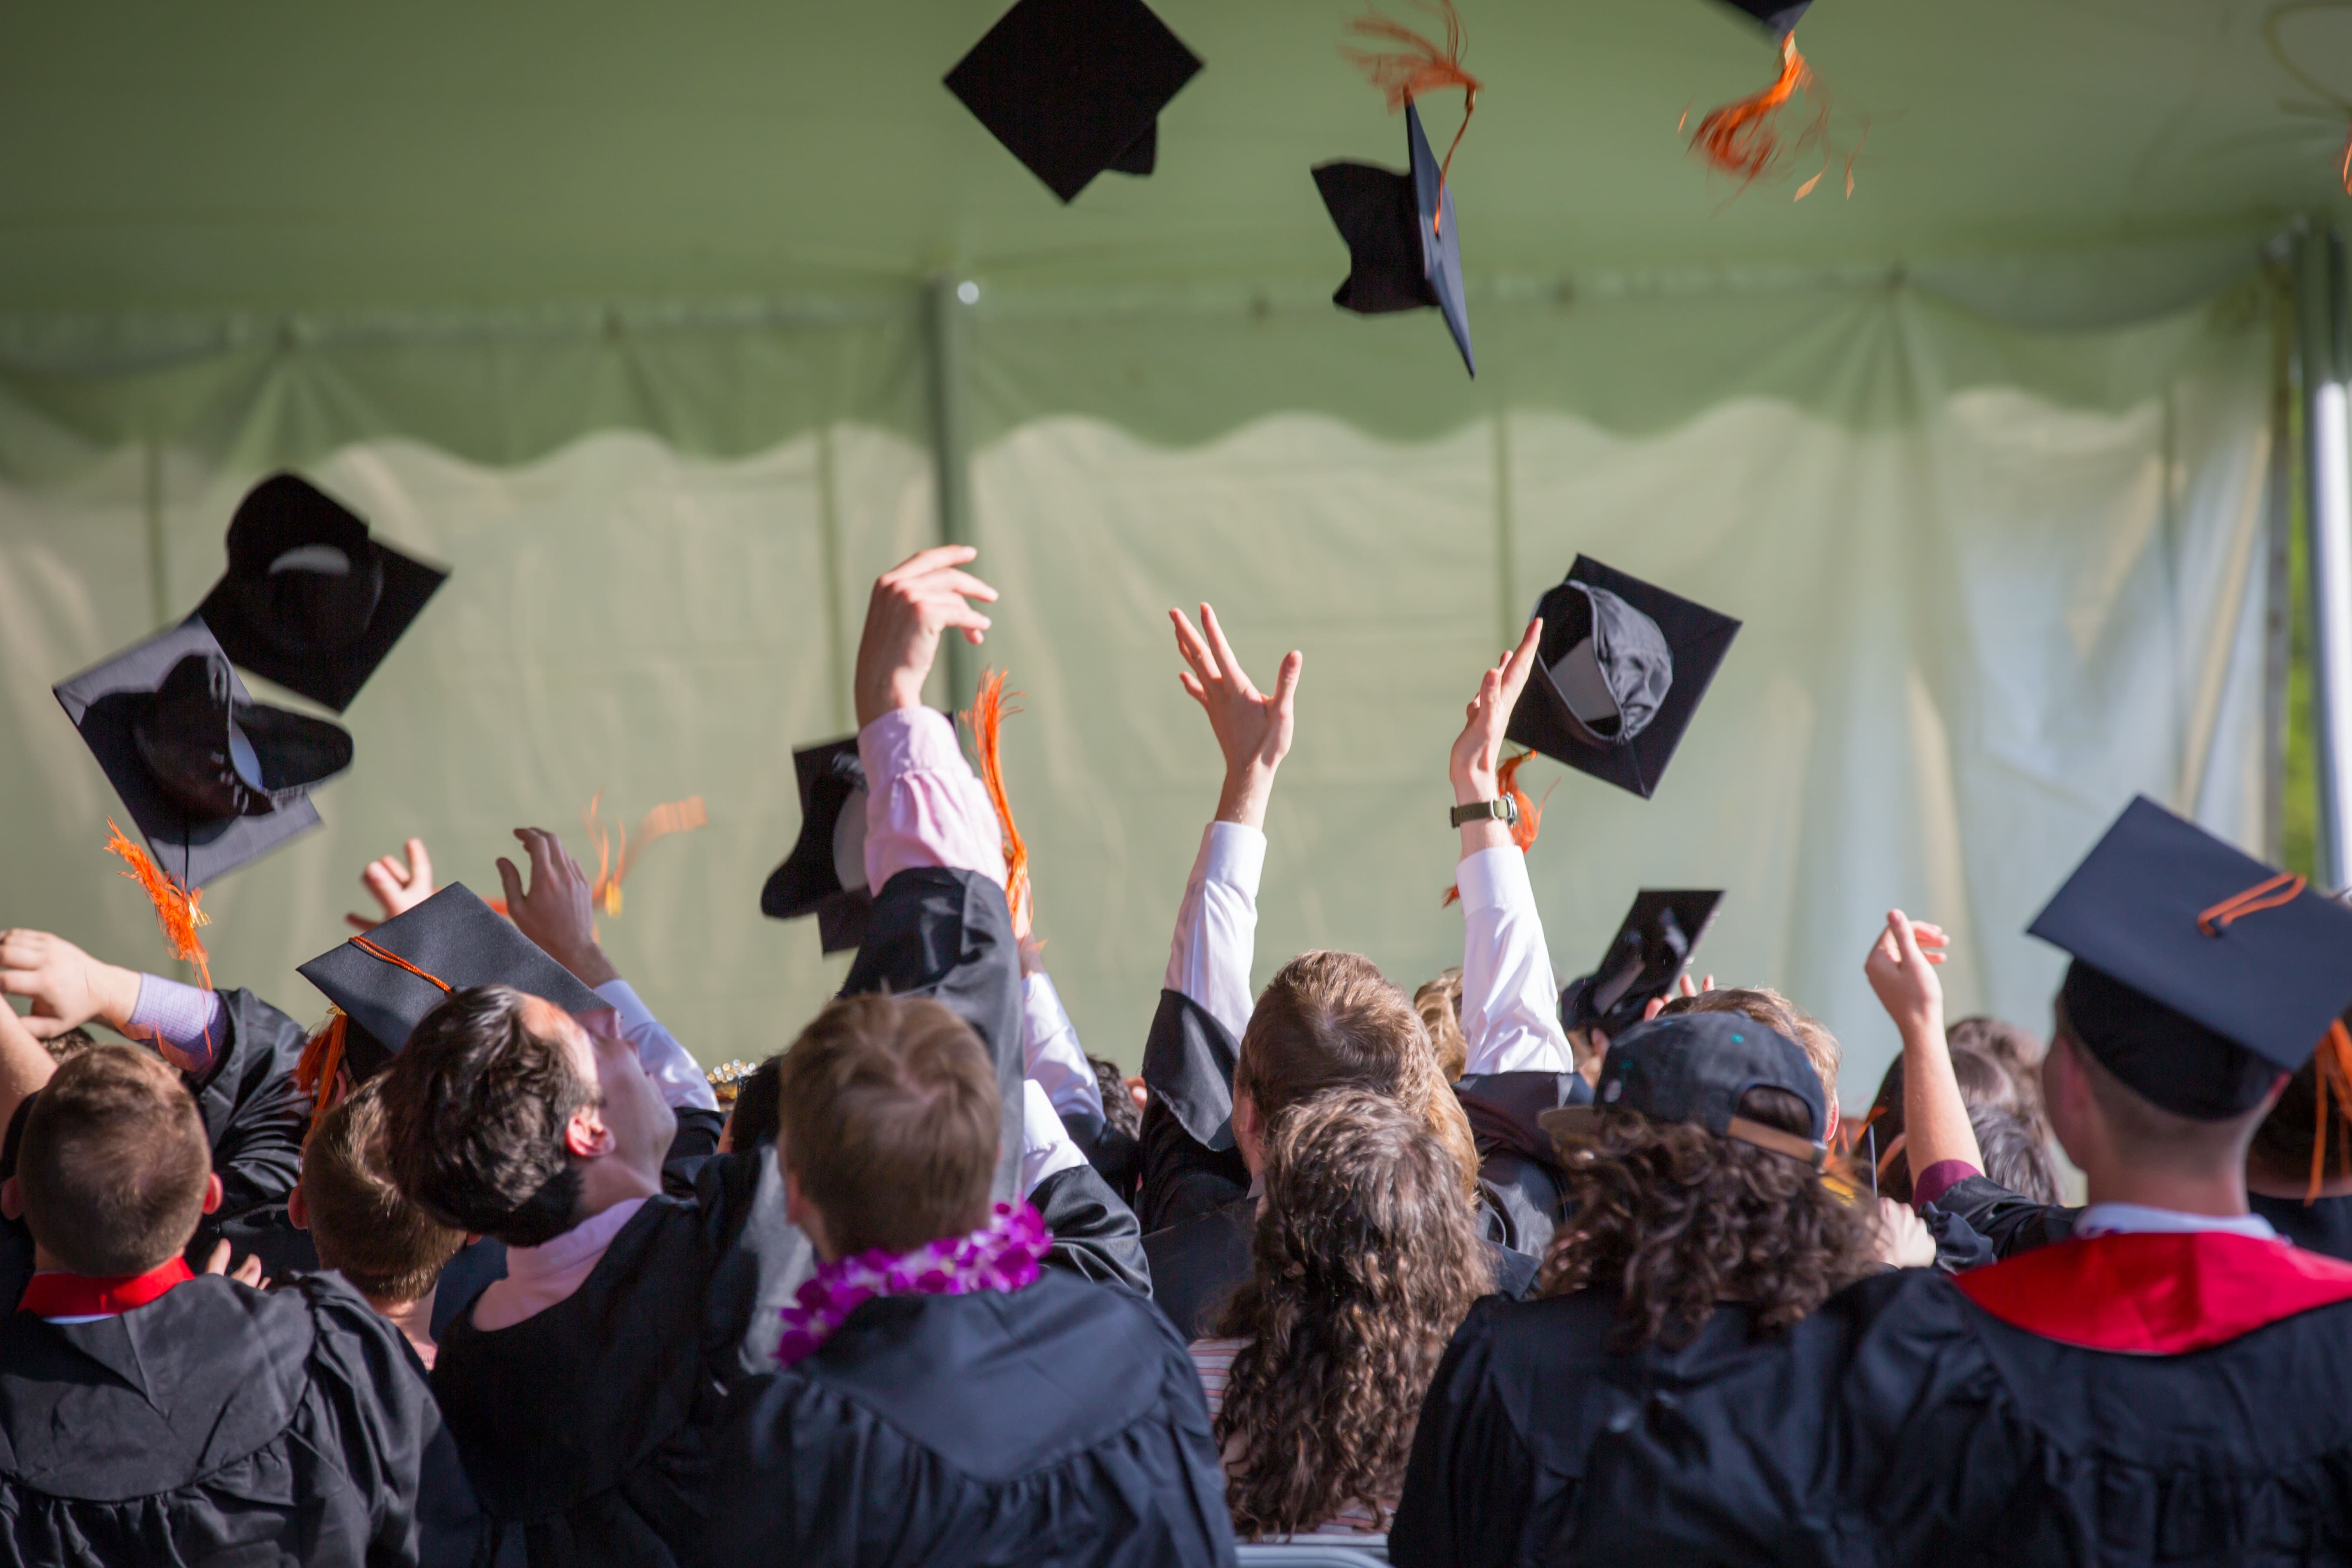 Graduates throwing their mortarboards into the air, knowing they’ll provide a great ROI for companies that recruit graduates. 